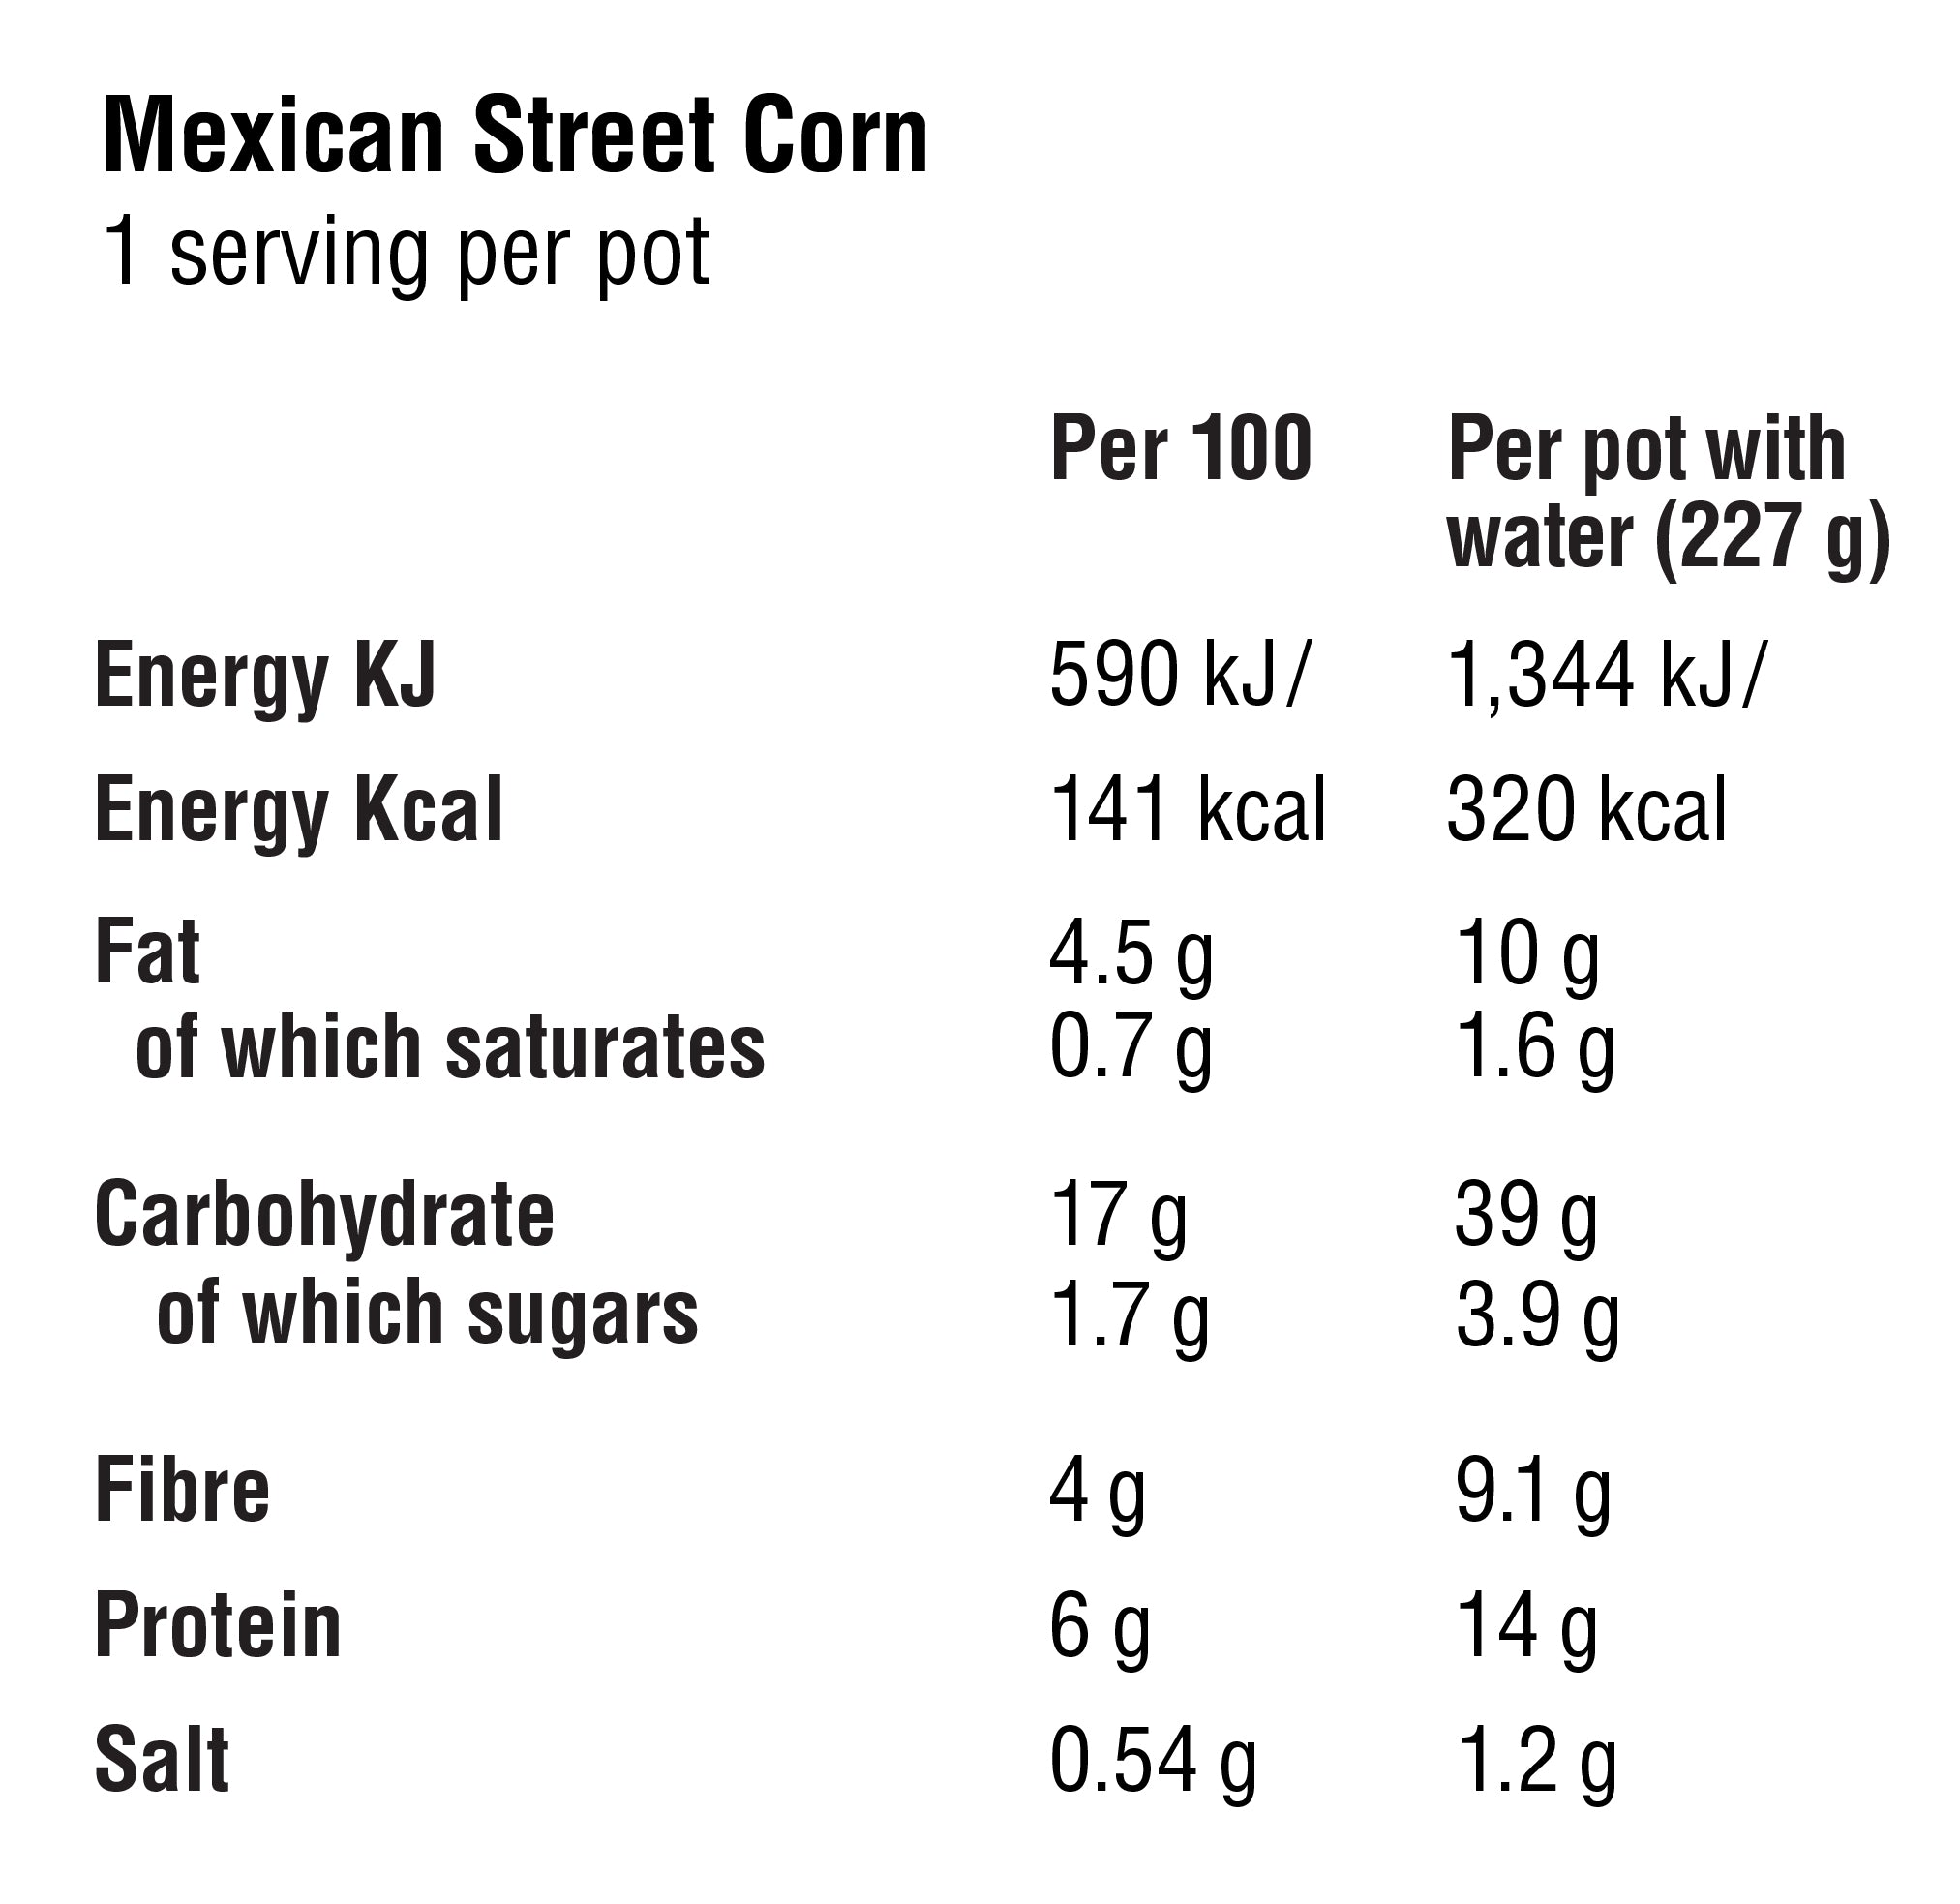 ZENB Mexican Street Corn Agile Bowl Nutritional Facts